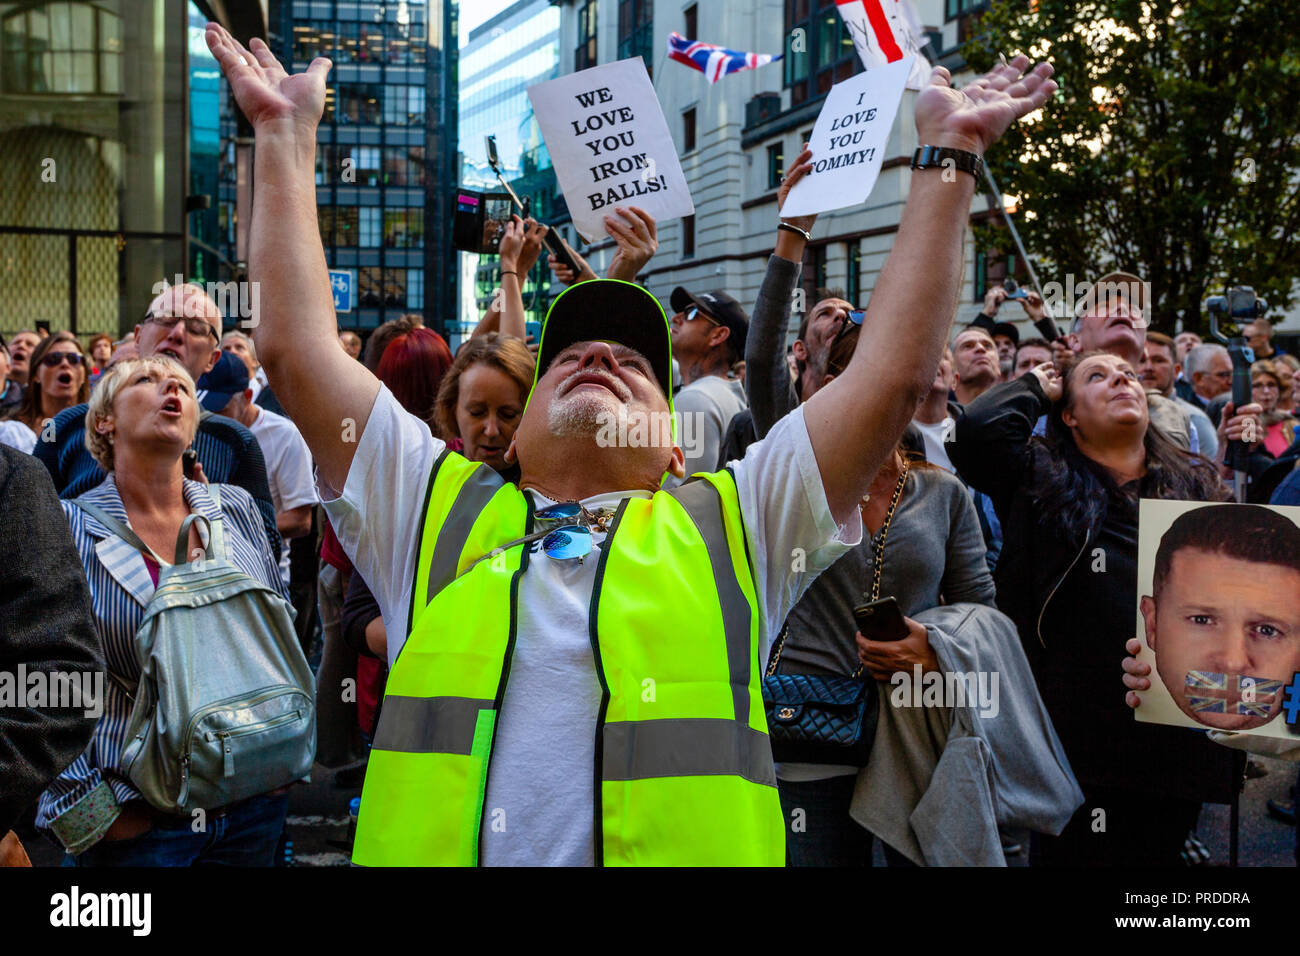 Supporters Of The Right Wing Activist Tommy Robinson Show Support Outside The Old Bailey As He Answers A Charge For Contempt Of Court, London, UK Stock Photo